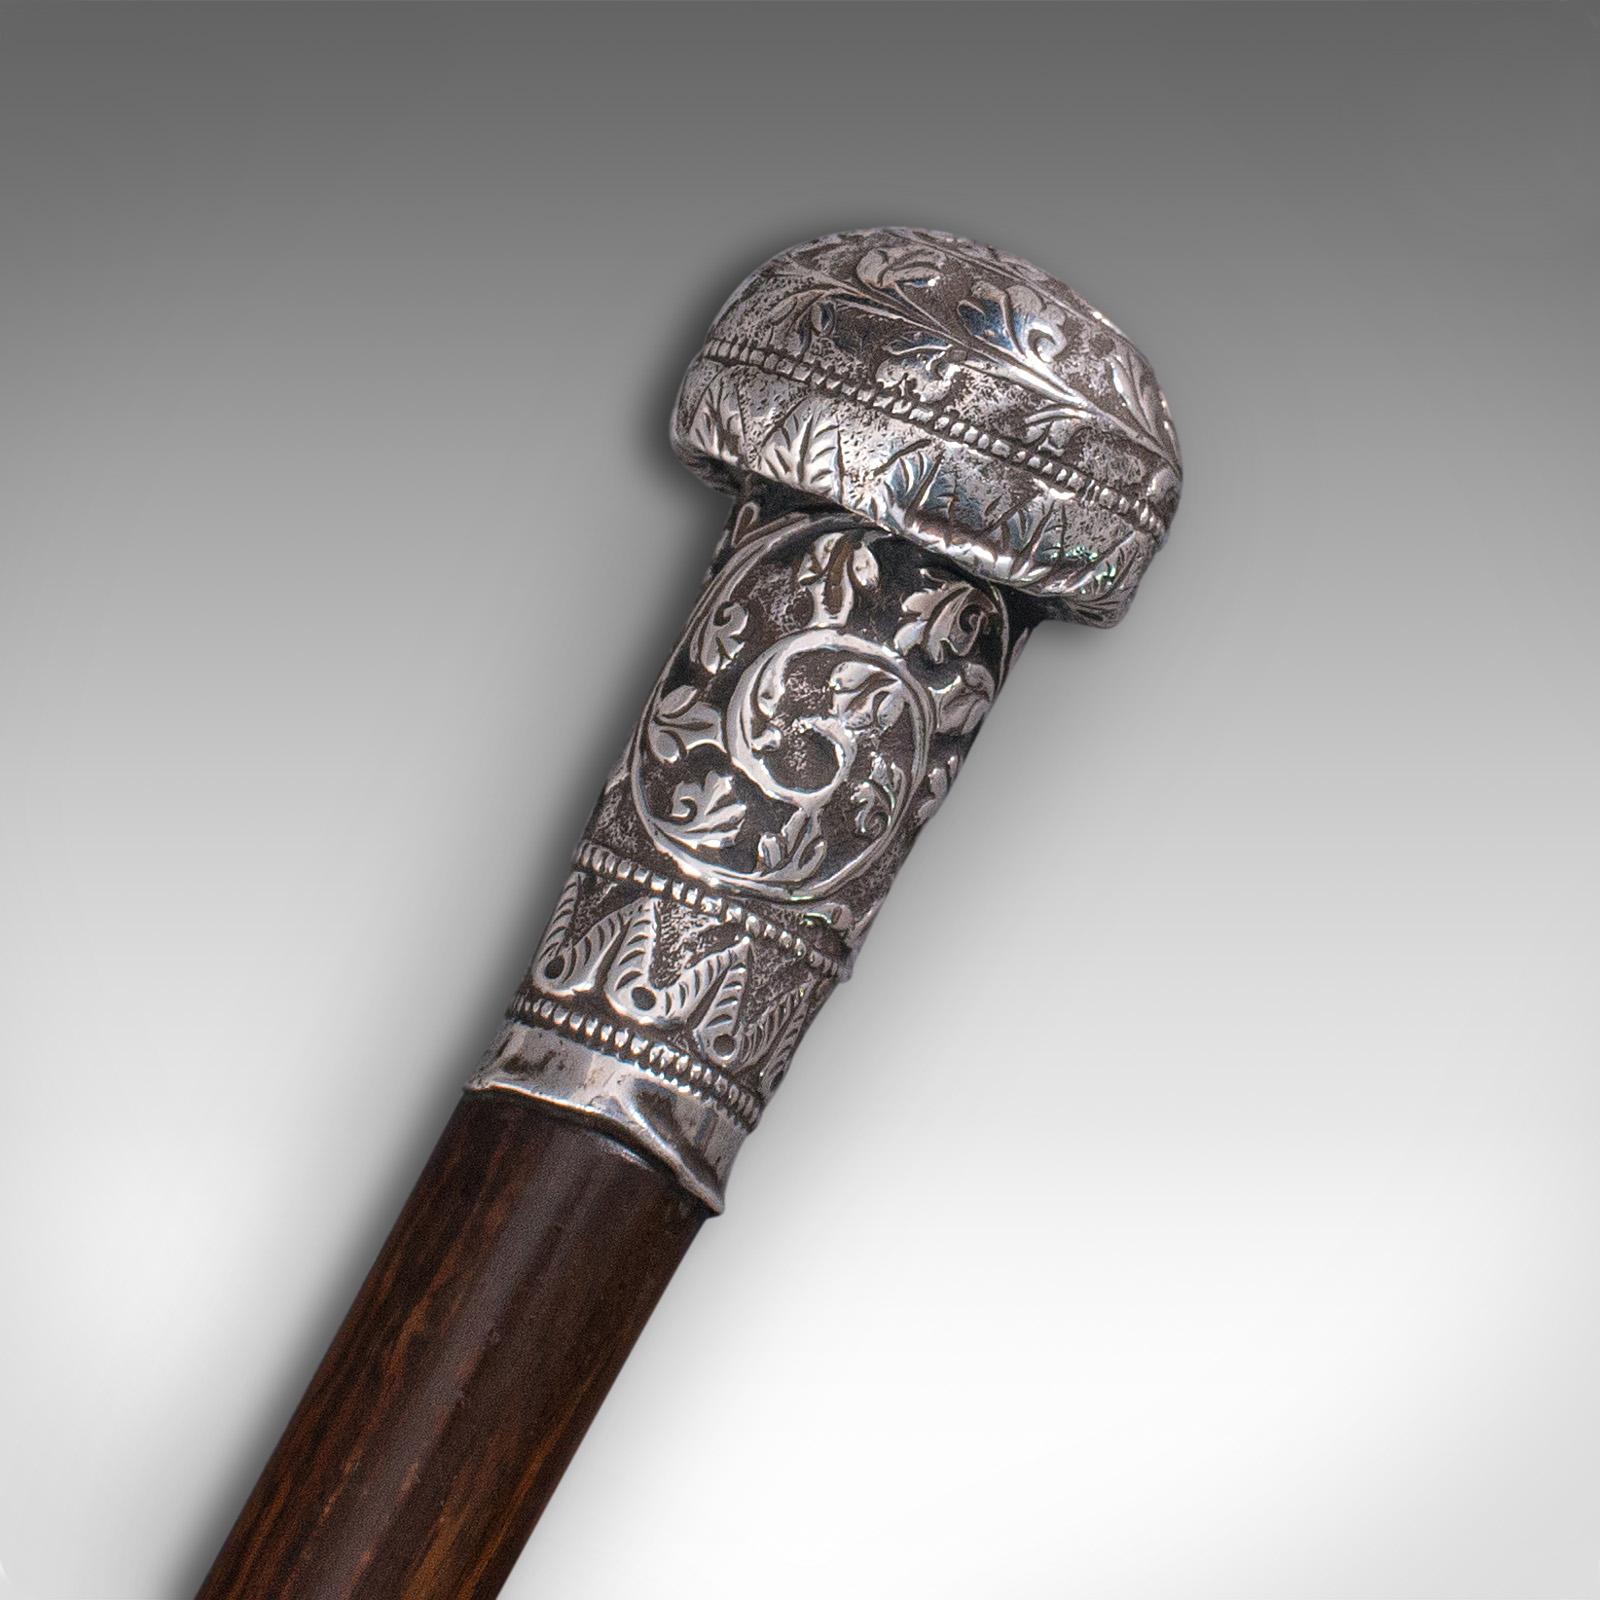 Wood Antique Colonial Walking Cane, Anglo Indian, Coromandel, Swagger Stick, Georgian